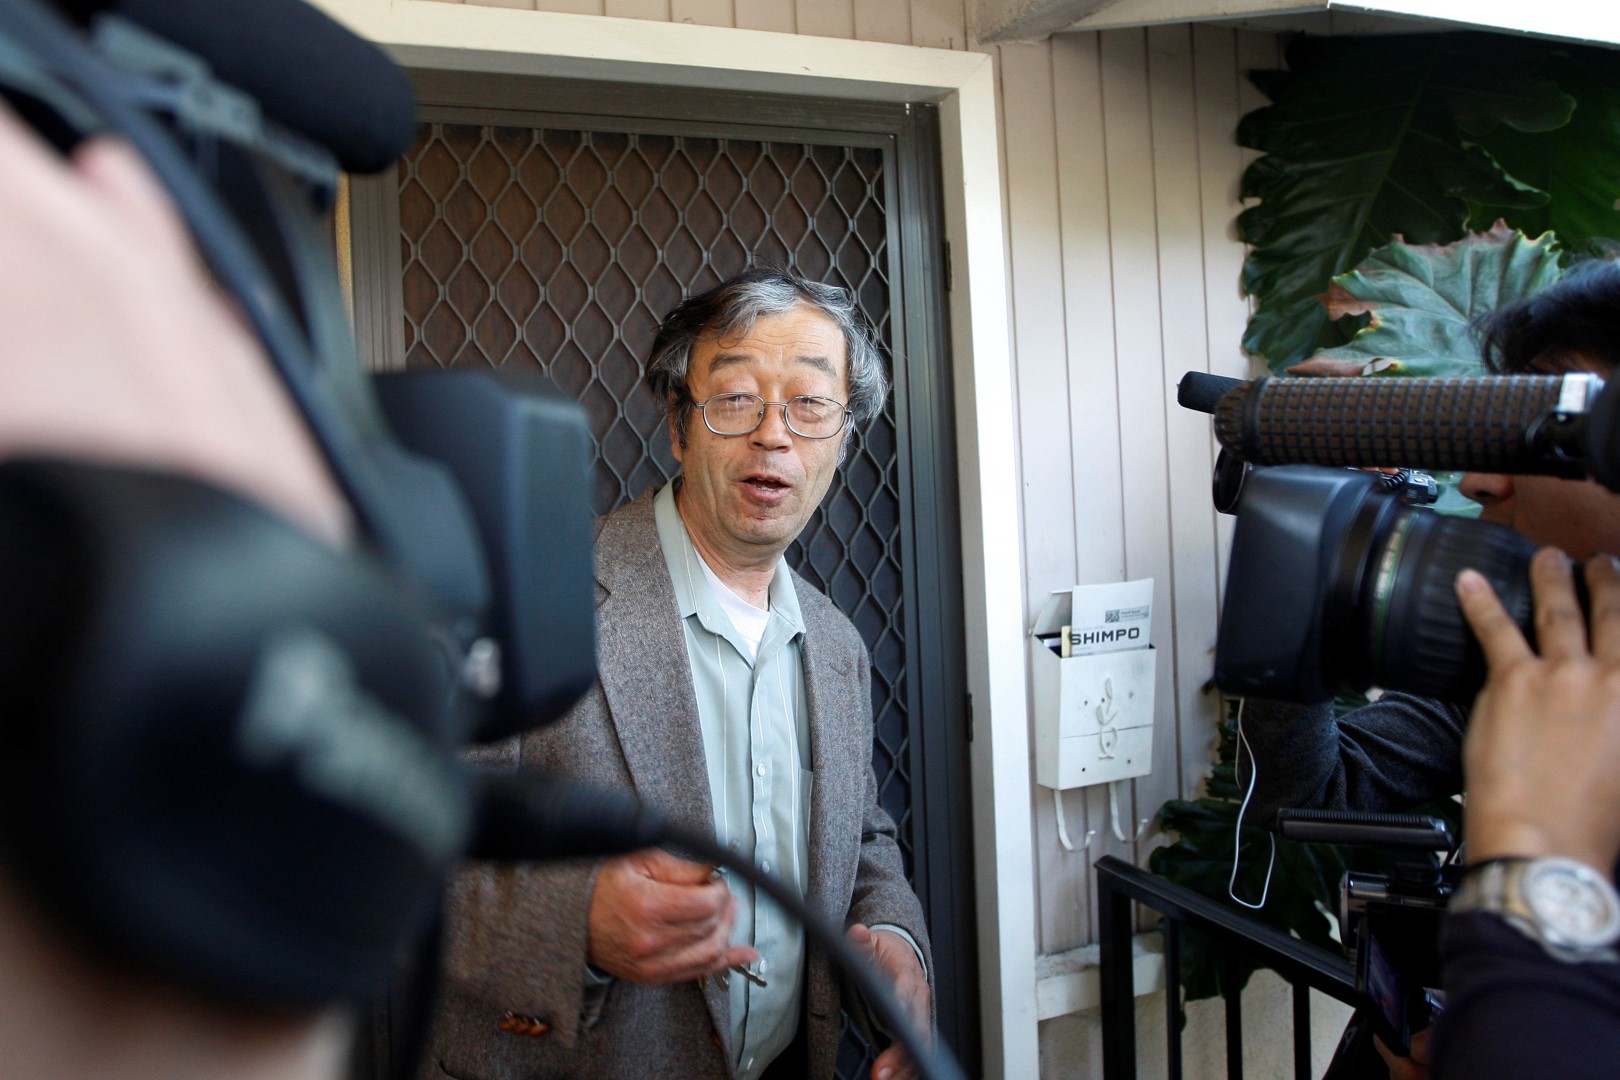 A man widely believed to be Bitcoin currency founder Satoshi Nakamoto, also known as Dorian Nakamoto, is surrounded by reporters as he leaves his home in Temple City, California March 6, 2014. REUTERS/David McNew (UNITED STATES - Tags: BUSINESS TPX IMAGES OF THE DAY) - GM1EA370DAA01